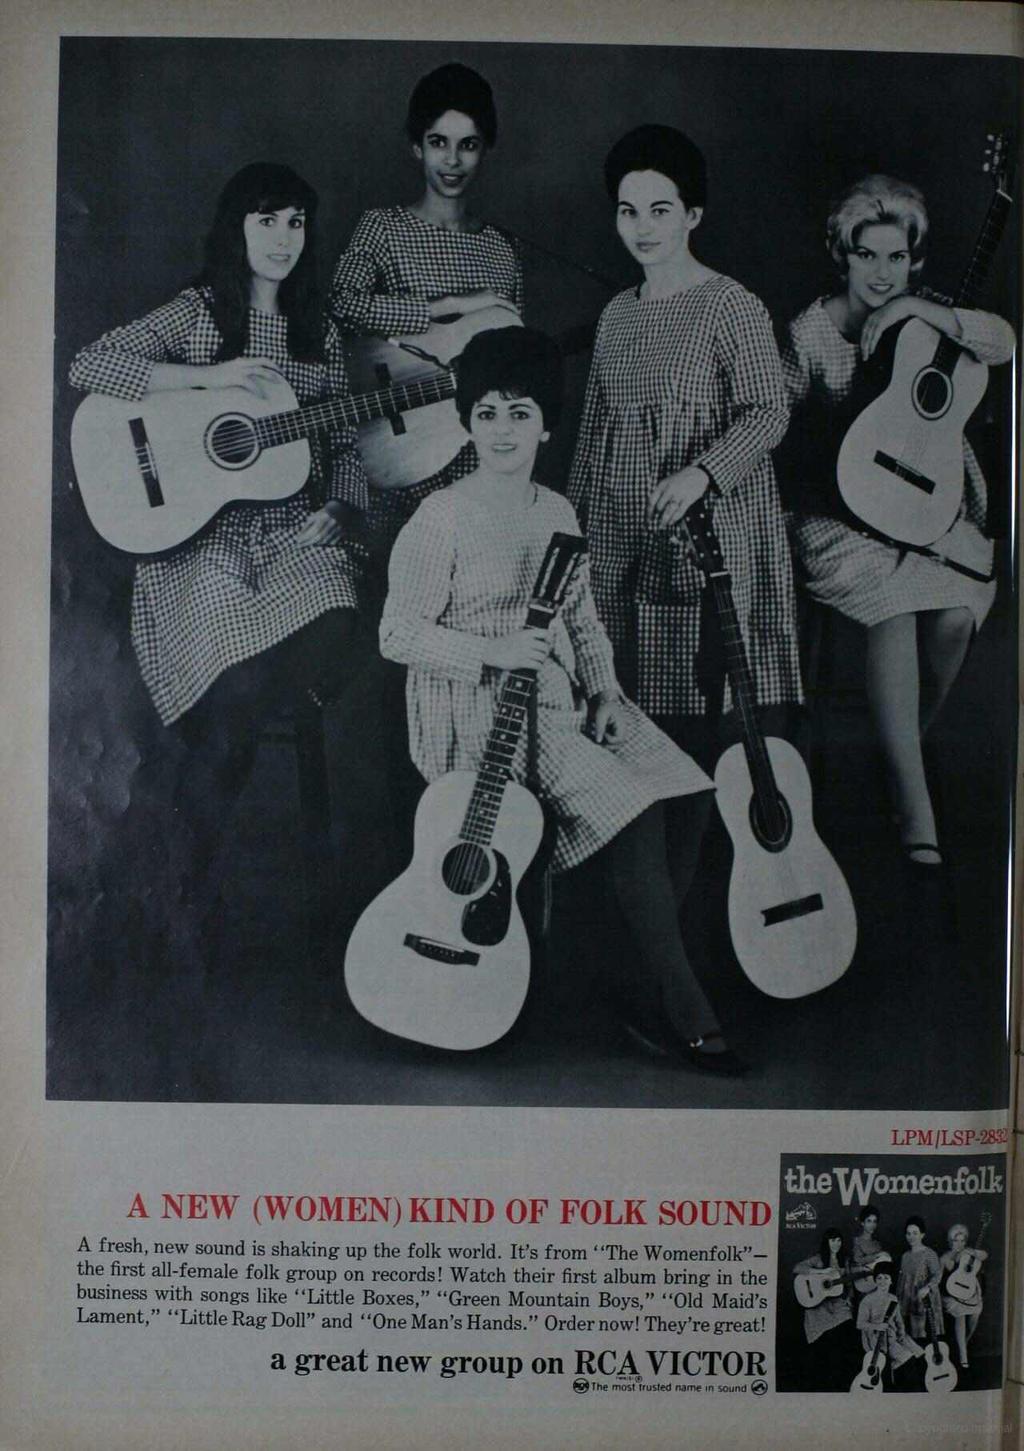 A NEW (WOMEN) KIND OF FOLK SOUND A fresh, new sound is shaking up the folk world. It's from "The Womenfolk" - the first all -female folk group on records!